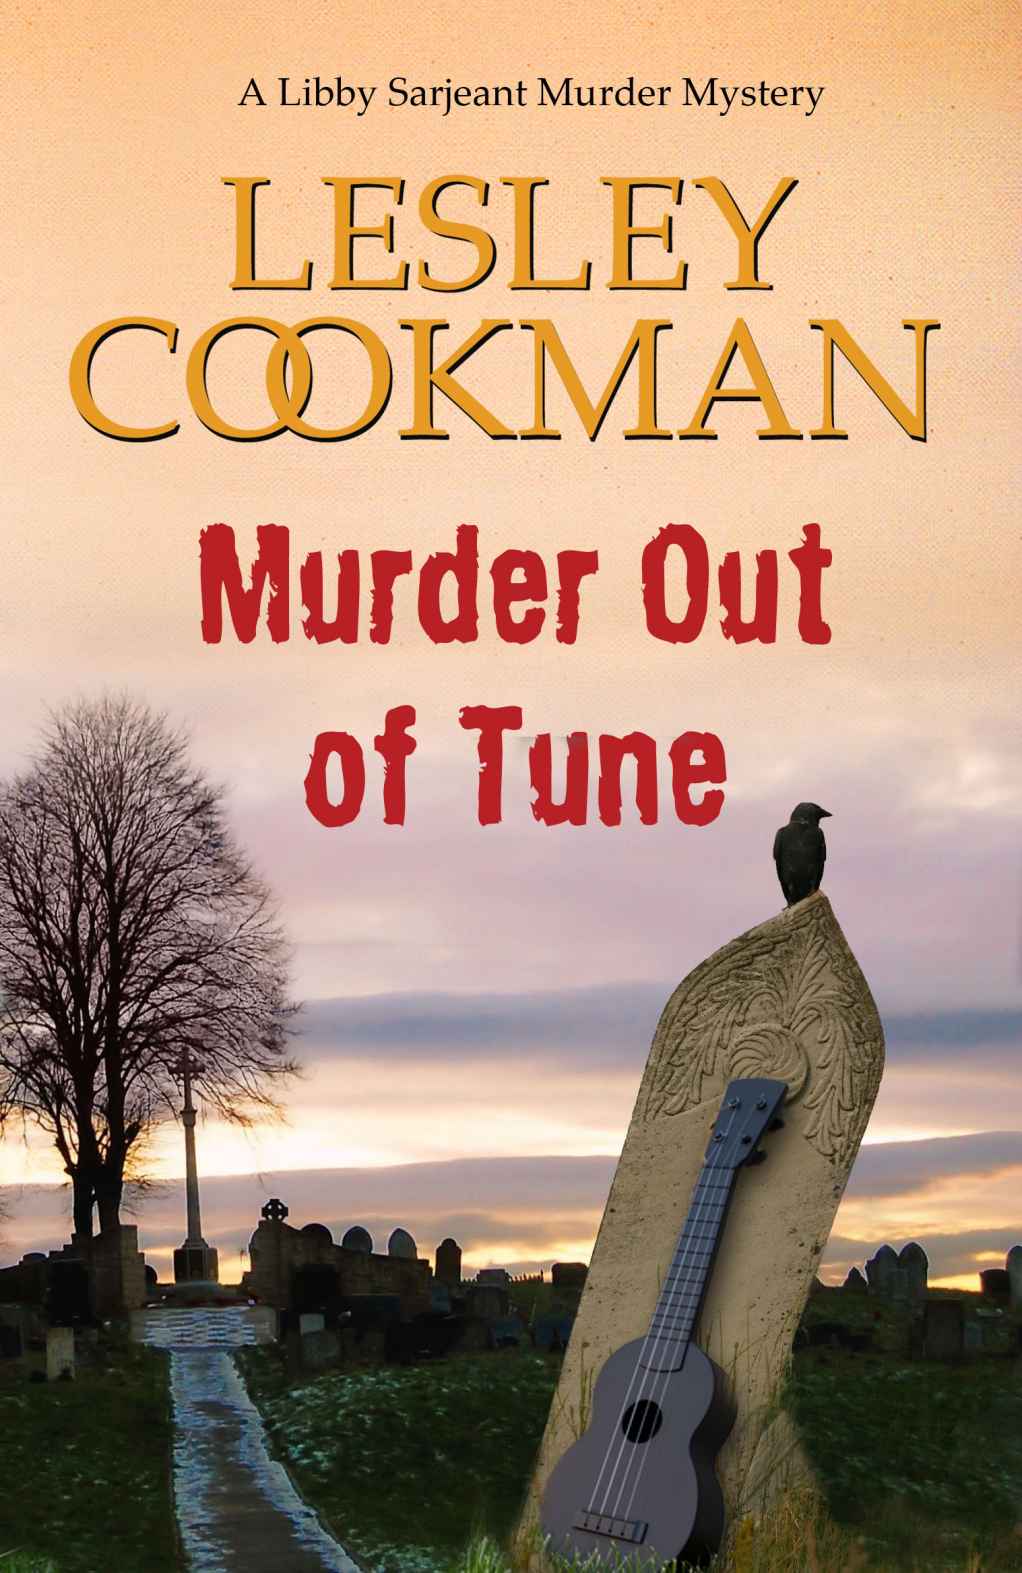 Murder Out of Tune - A Libby Sarjeant Murder Mystery by Lesley Cookman